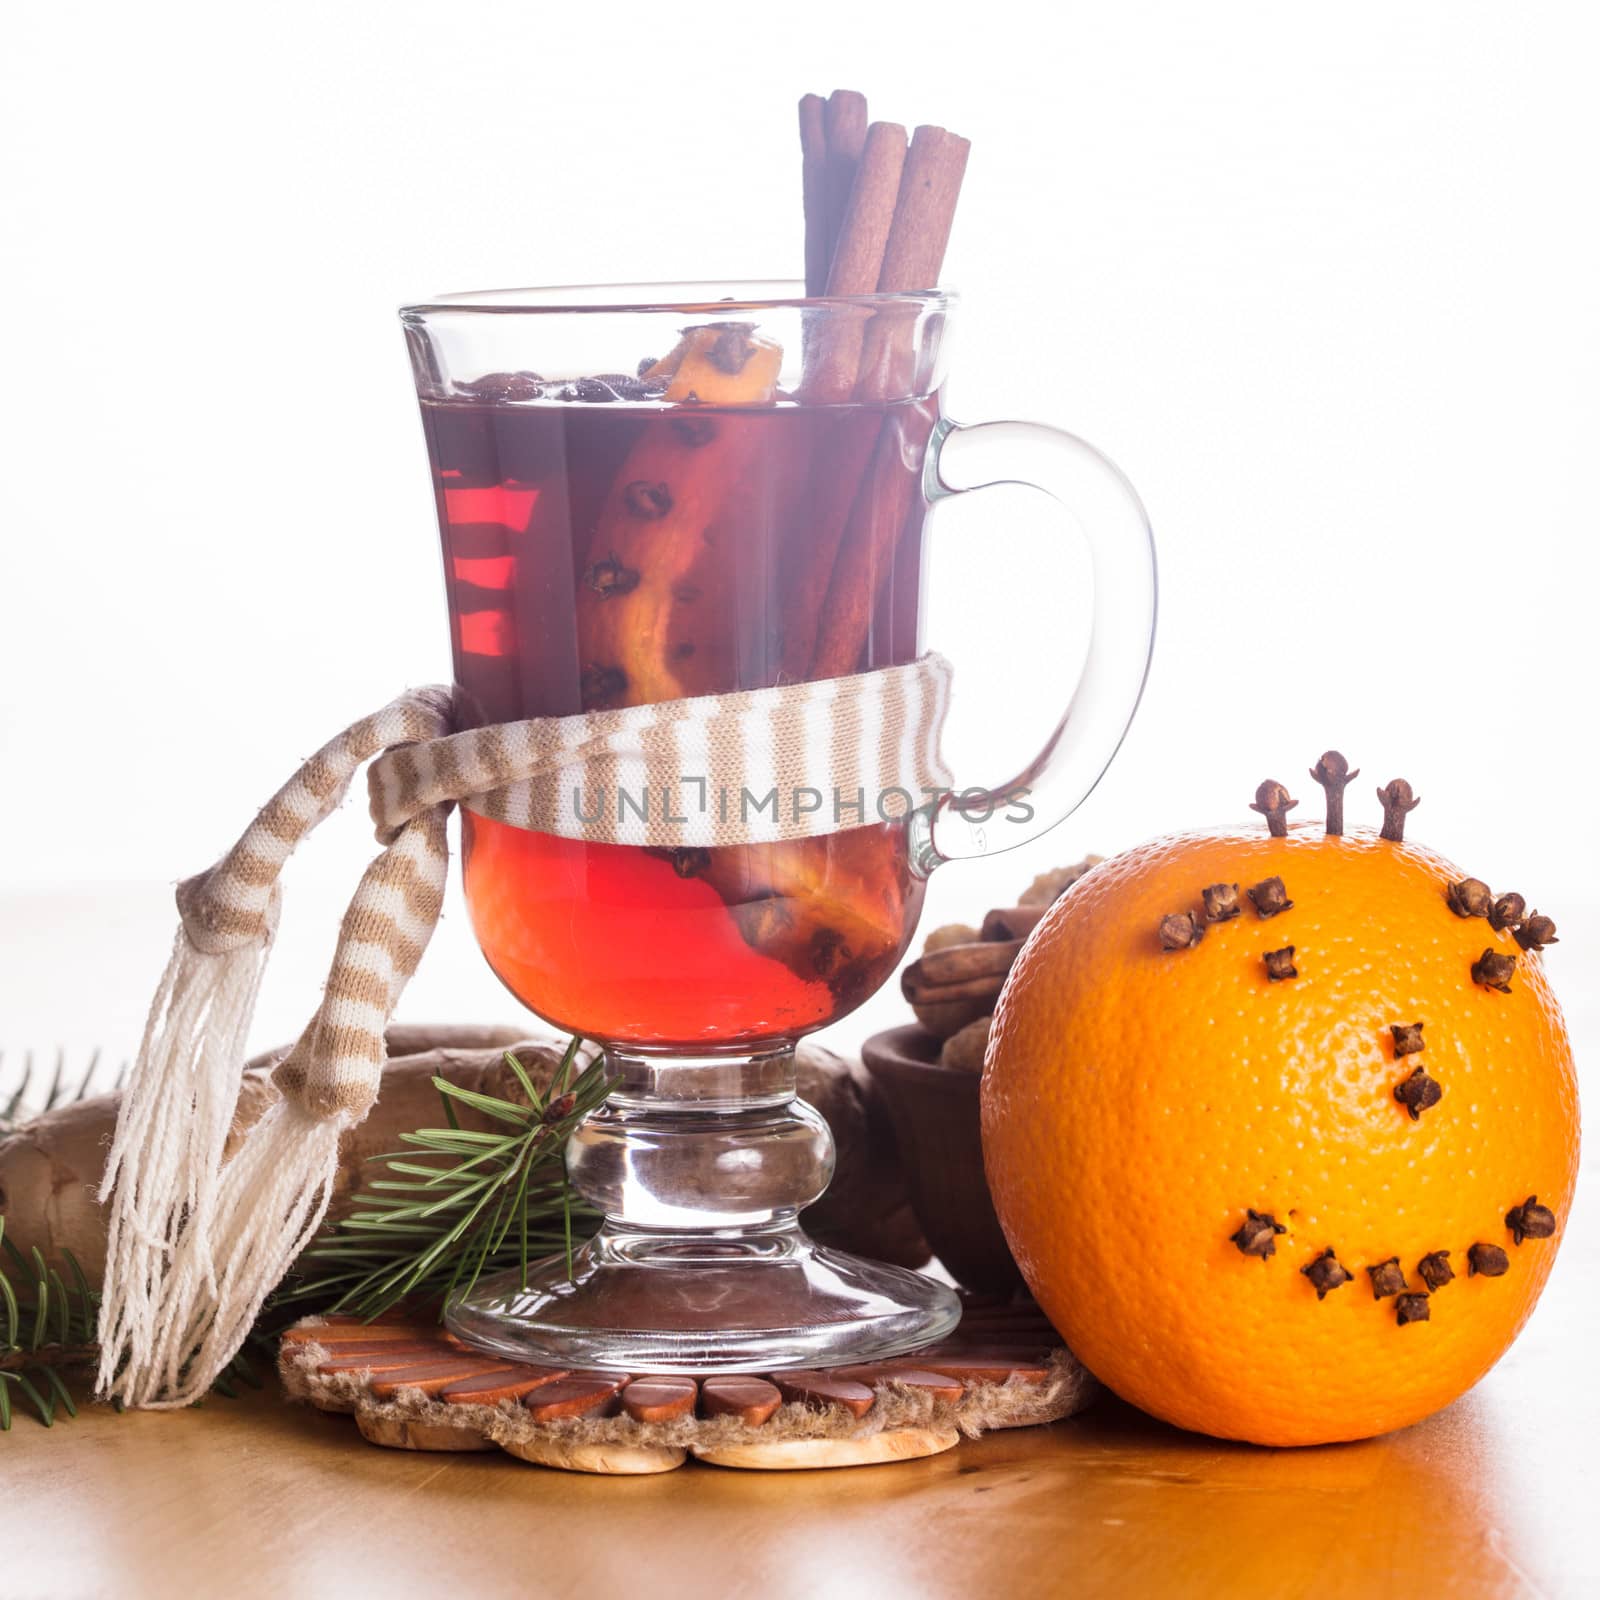 A mulled wine in the glass cup - warming drink